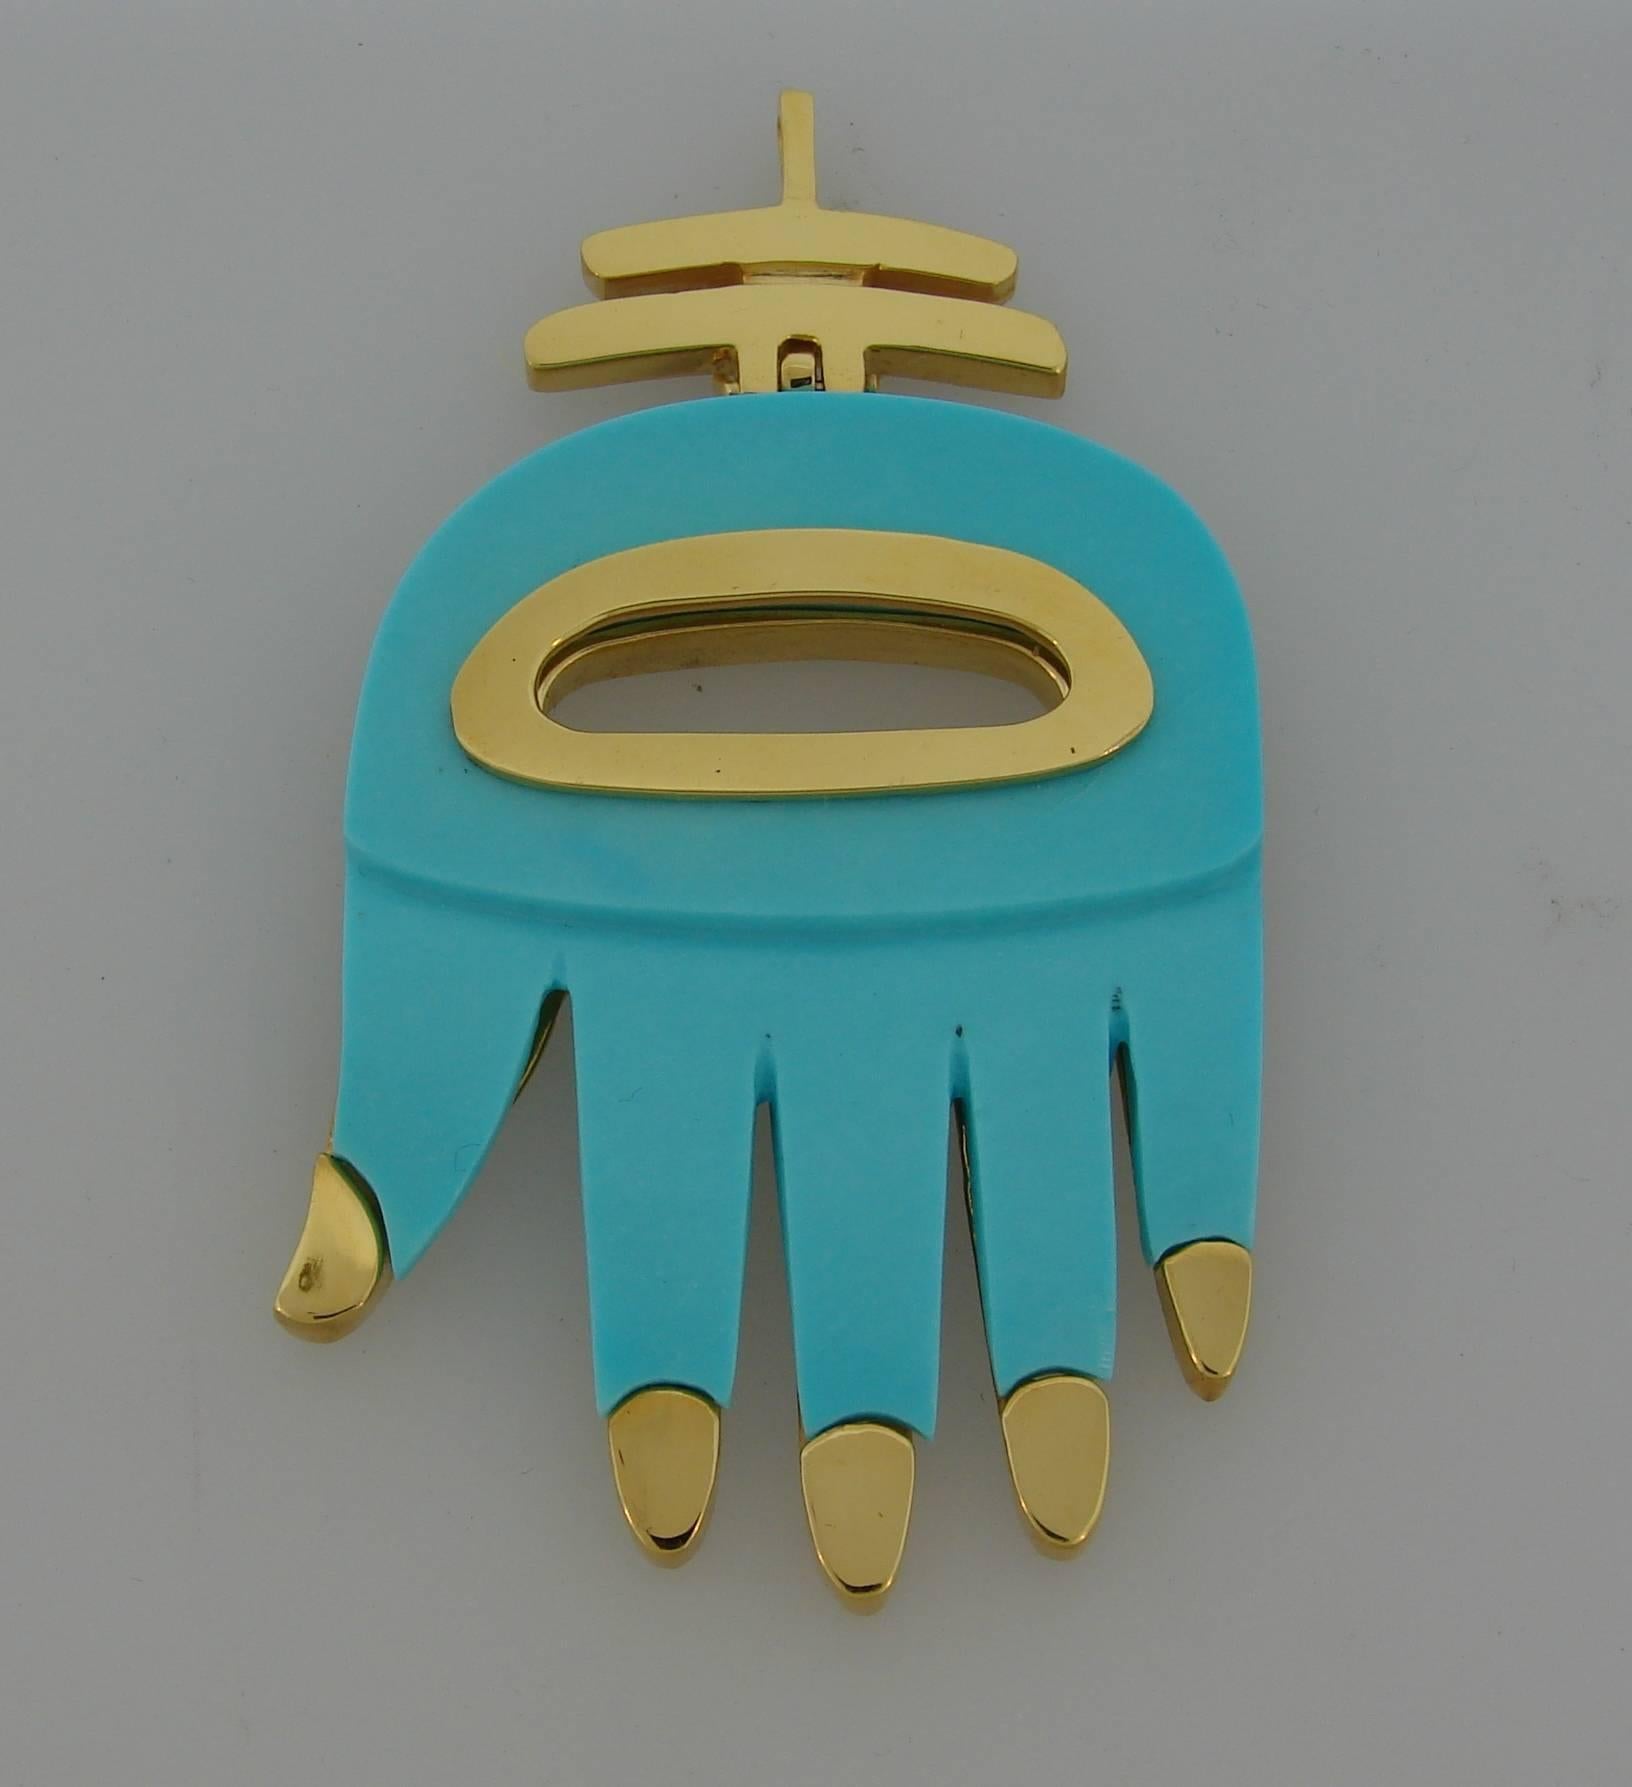 Colorful signature Aldo Cipullo Hamsa hand - a very recognizable and collectible piece of jewelry. Created in the 1970's. Made of 18k yellow gold and re-manufactured turquoise. 
Size L (large).
Measurements - height 2.5